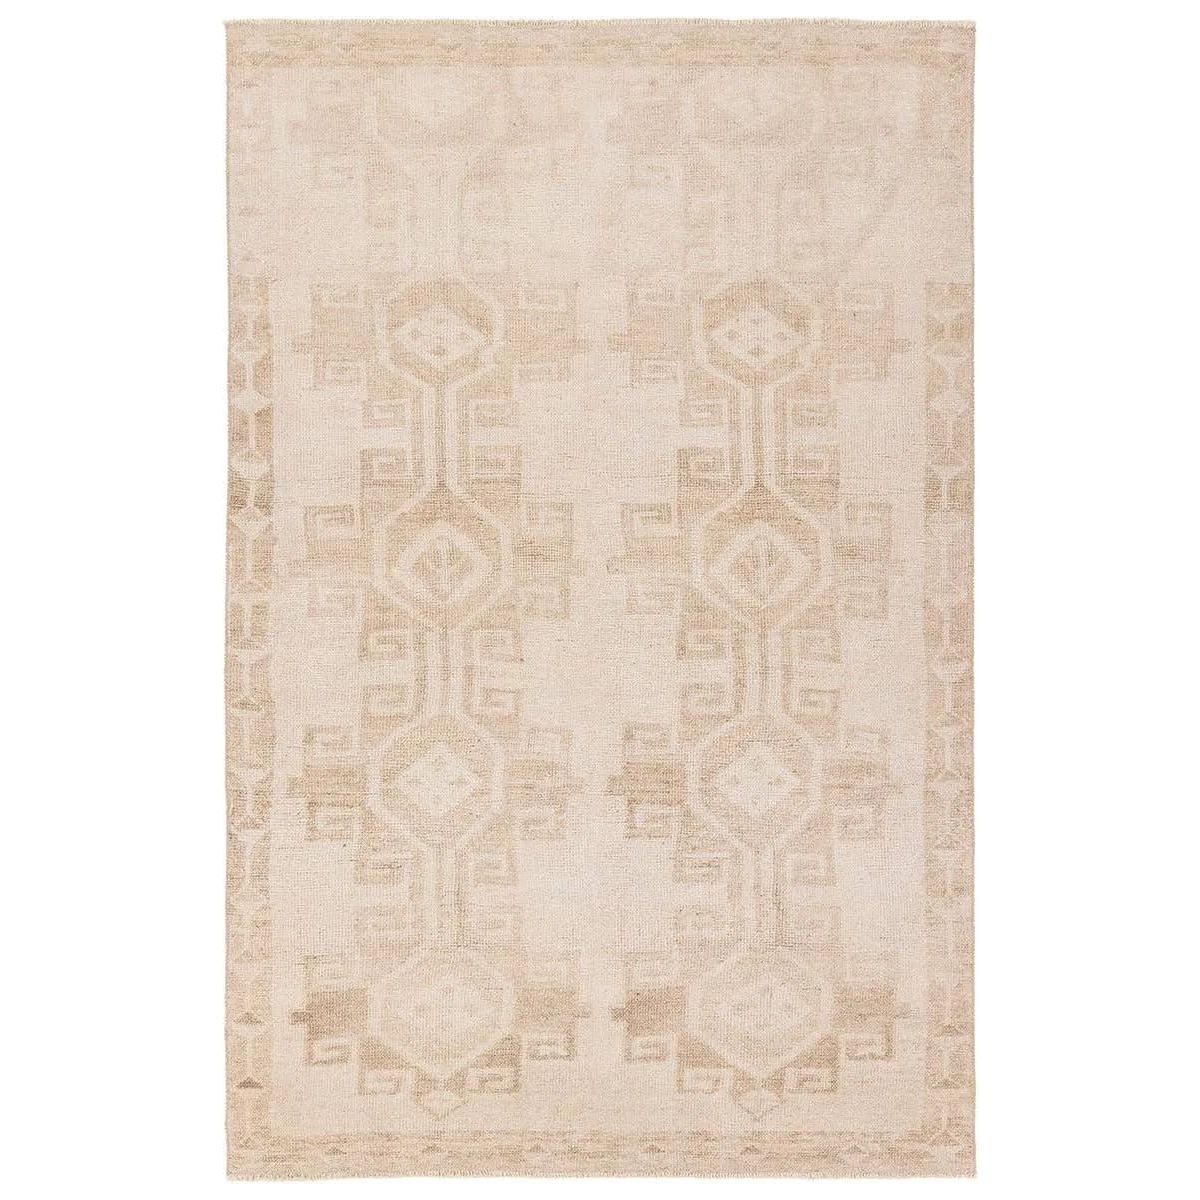 Distressed, vintage designs offer an elevated tone for the Lumal Collection. The Barine rug features Southwestern-inspired medallions and a thin geometric border in tones of tan and cream. This machine washable rug is stain resistant and easy to clean, perfect for homes with children and pets. Amethyst Home provides interior design, new home construction design consulting, vintage area rugs, and lighting in the San Diego metro area.